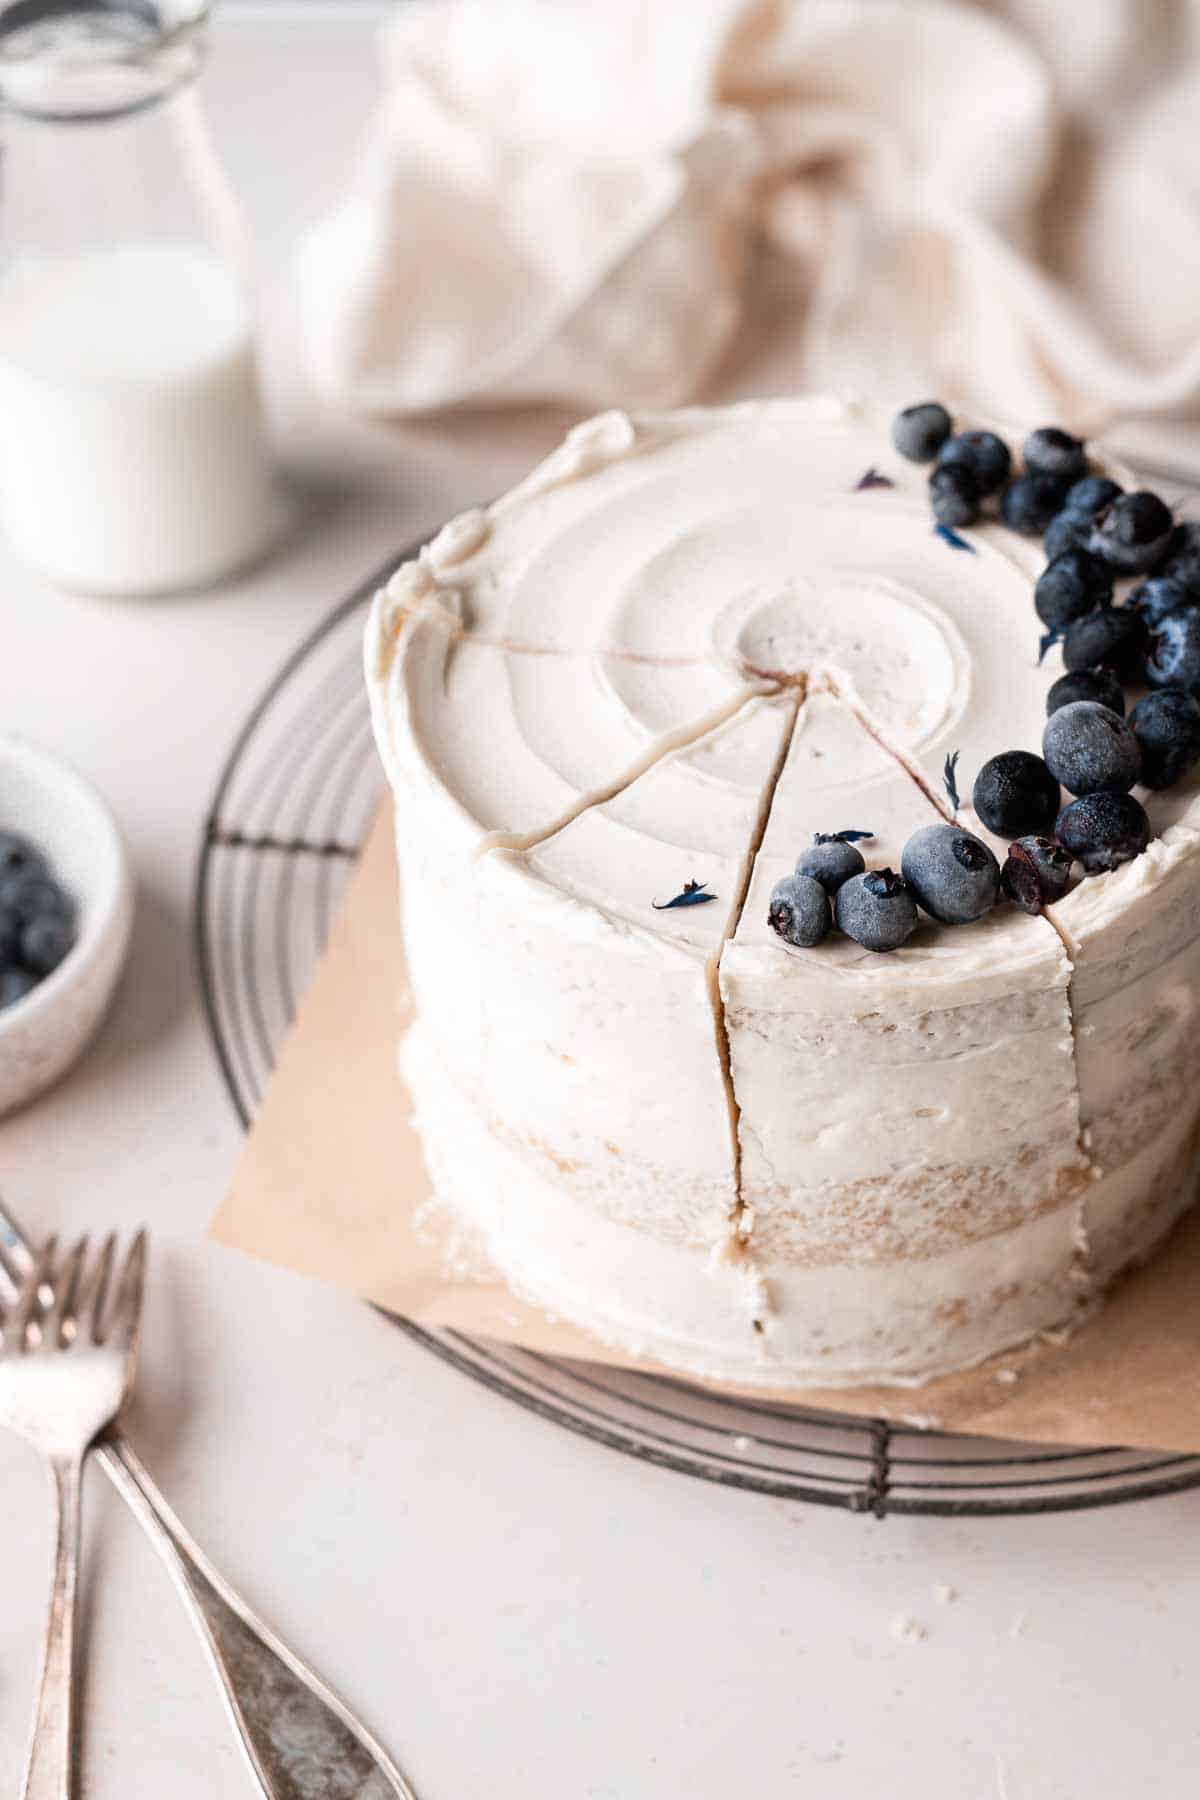 earl grey cake with blueberries on top.